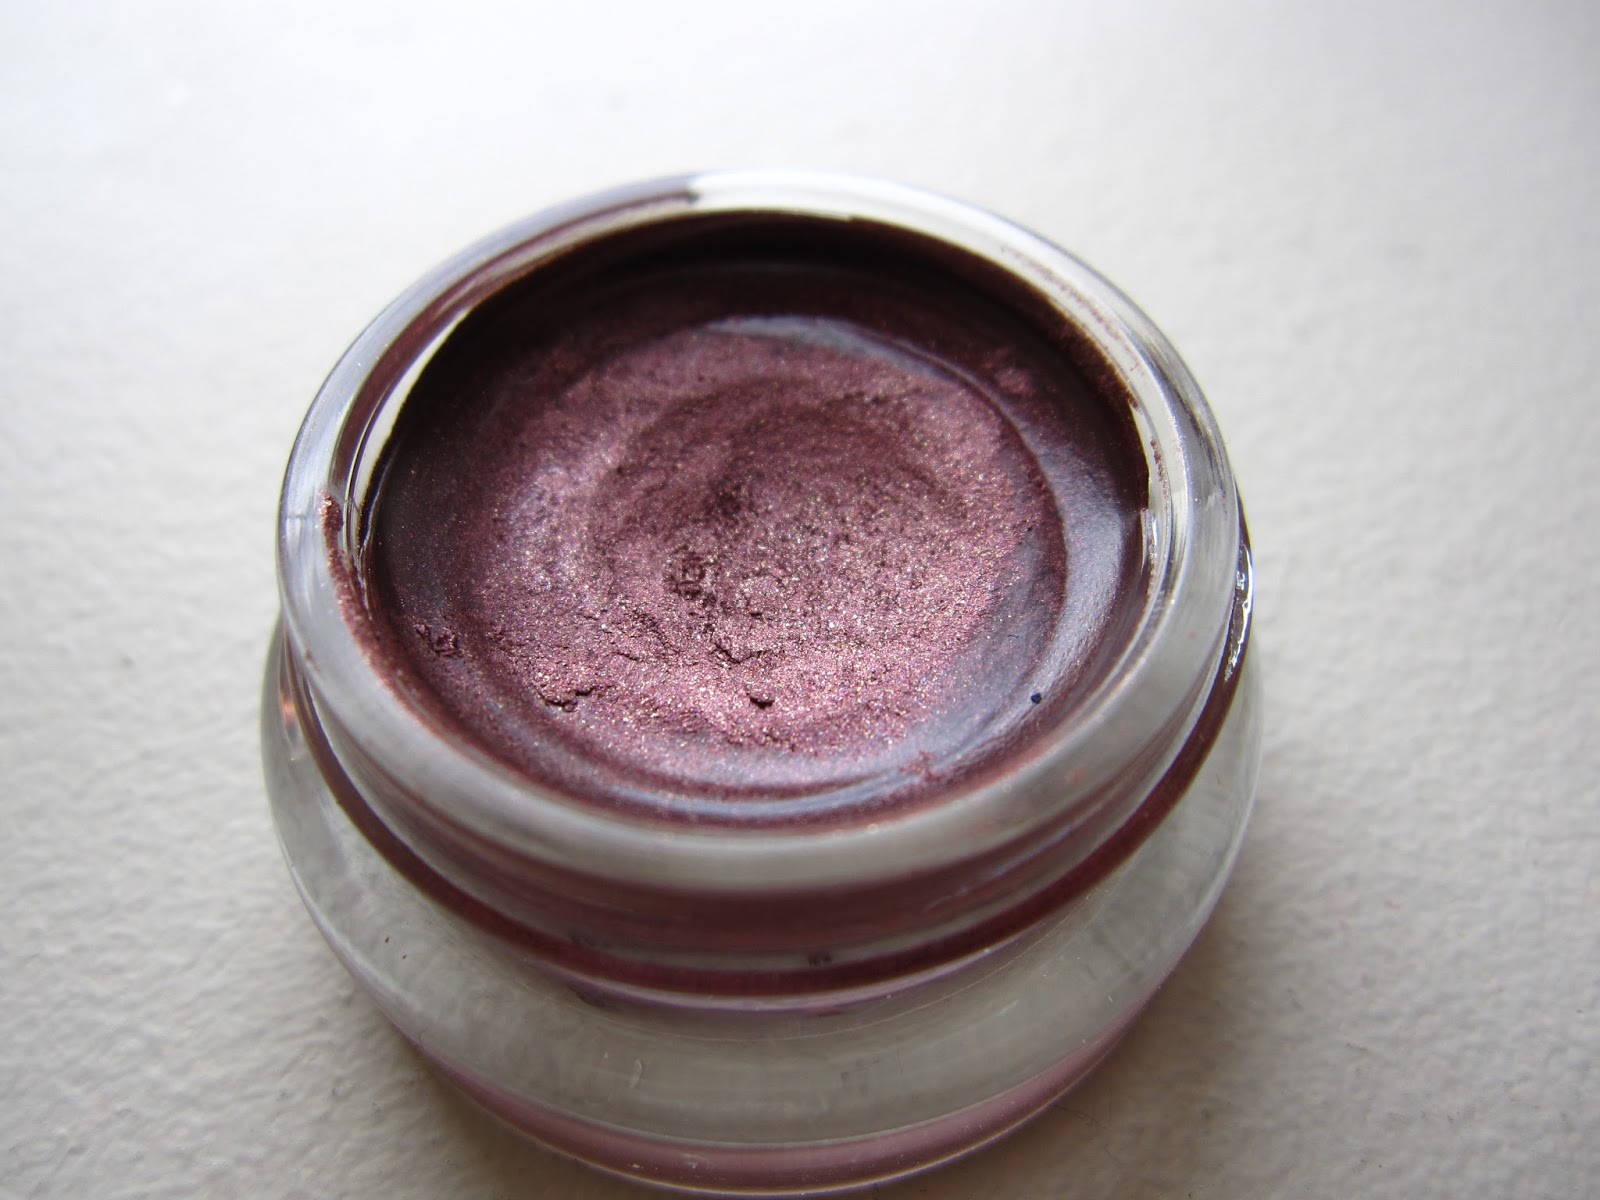 Maybelline Color Tattoo 24hr Eyeshadow: Pomegranate Punk review swatch eyeshadow